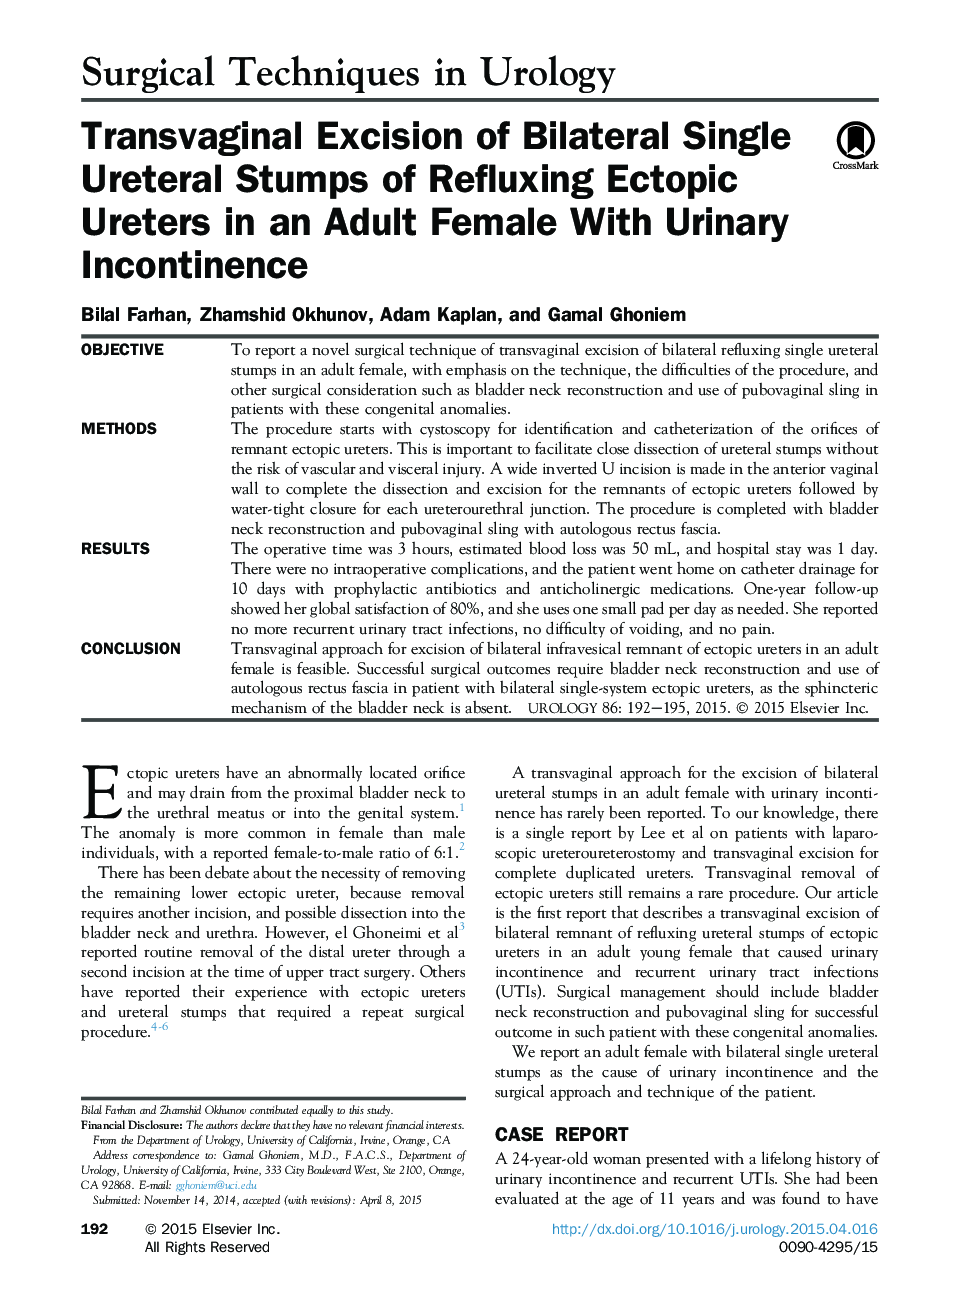 Transvaginal Excision of Bilateral Single Ureteral Stumps of Refluxing Ectopic Ureters in an Adult Female With Urinary Incontinence 